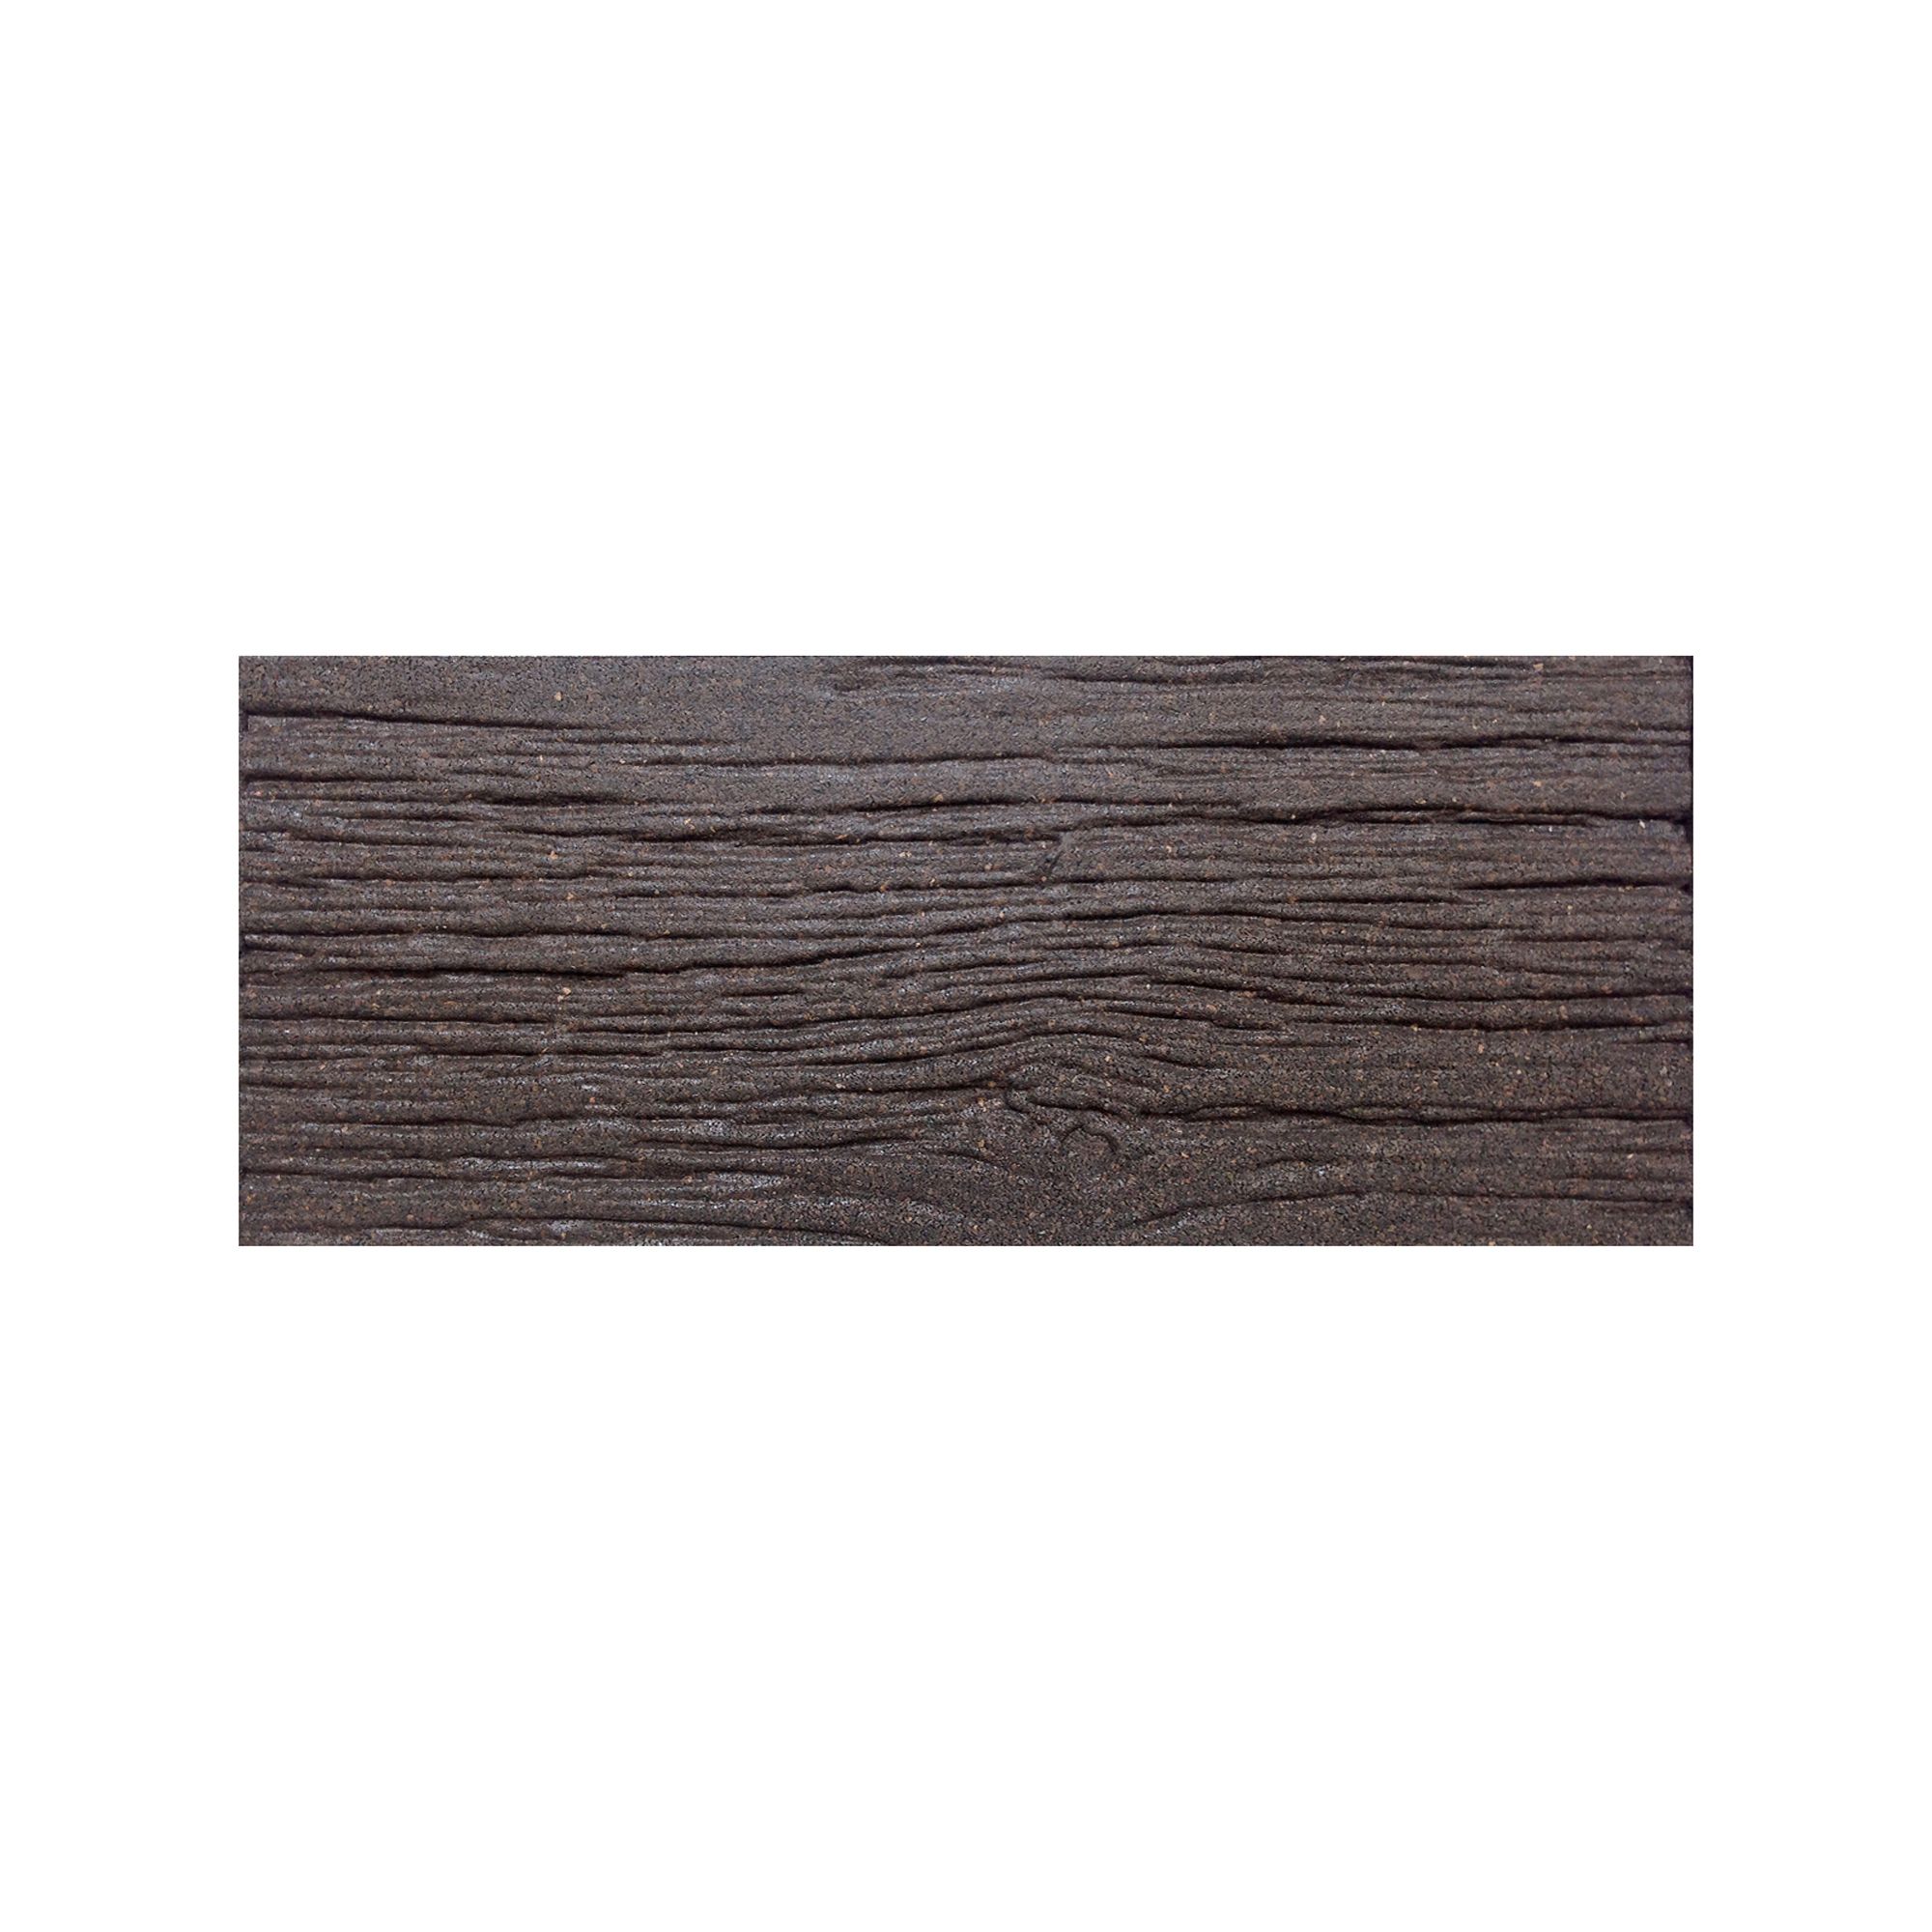 Earth brown Single size Railroad tie Stepping stone 0.15m²